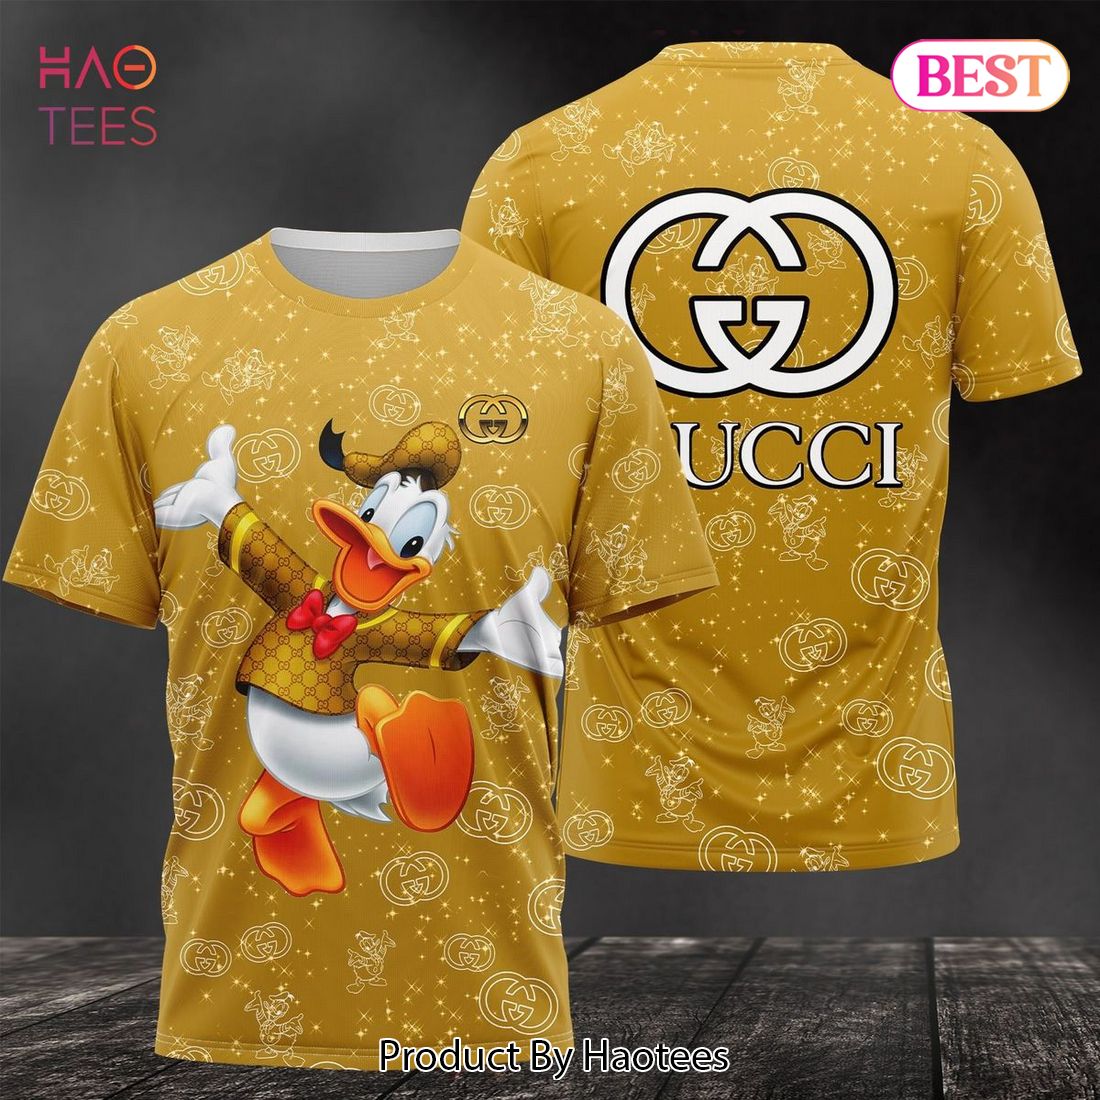 NEW Gucci Donald Duck Luxury Brand Gold Color 3D T-Shirt Limited Edition